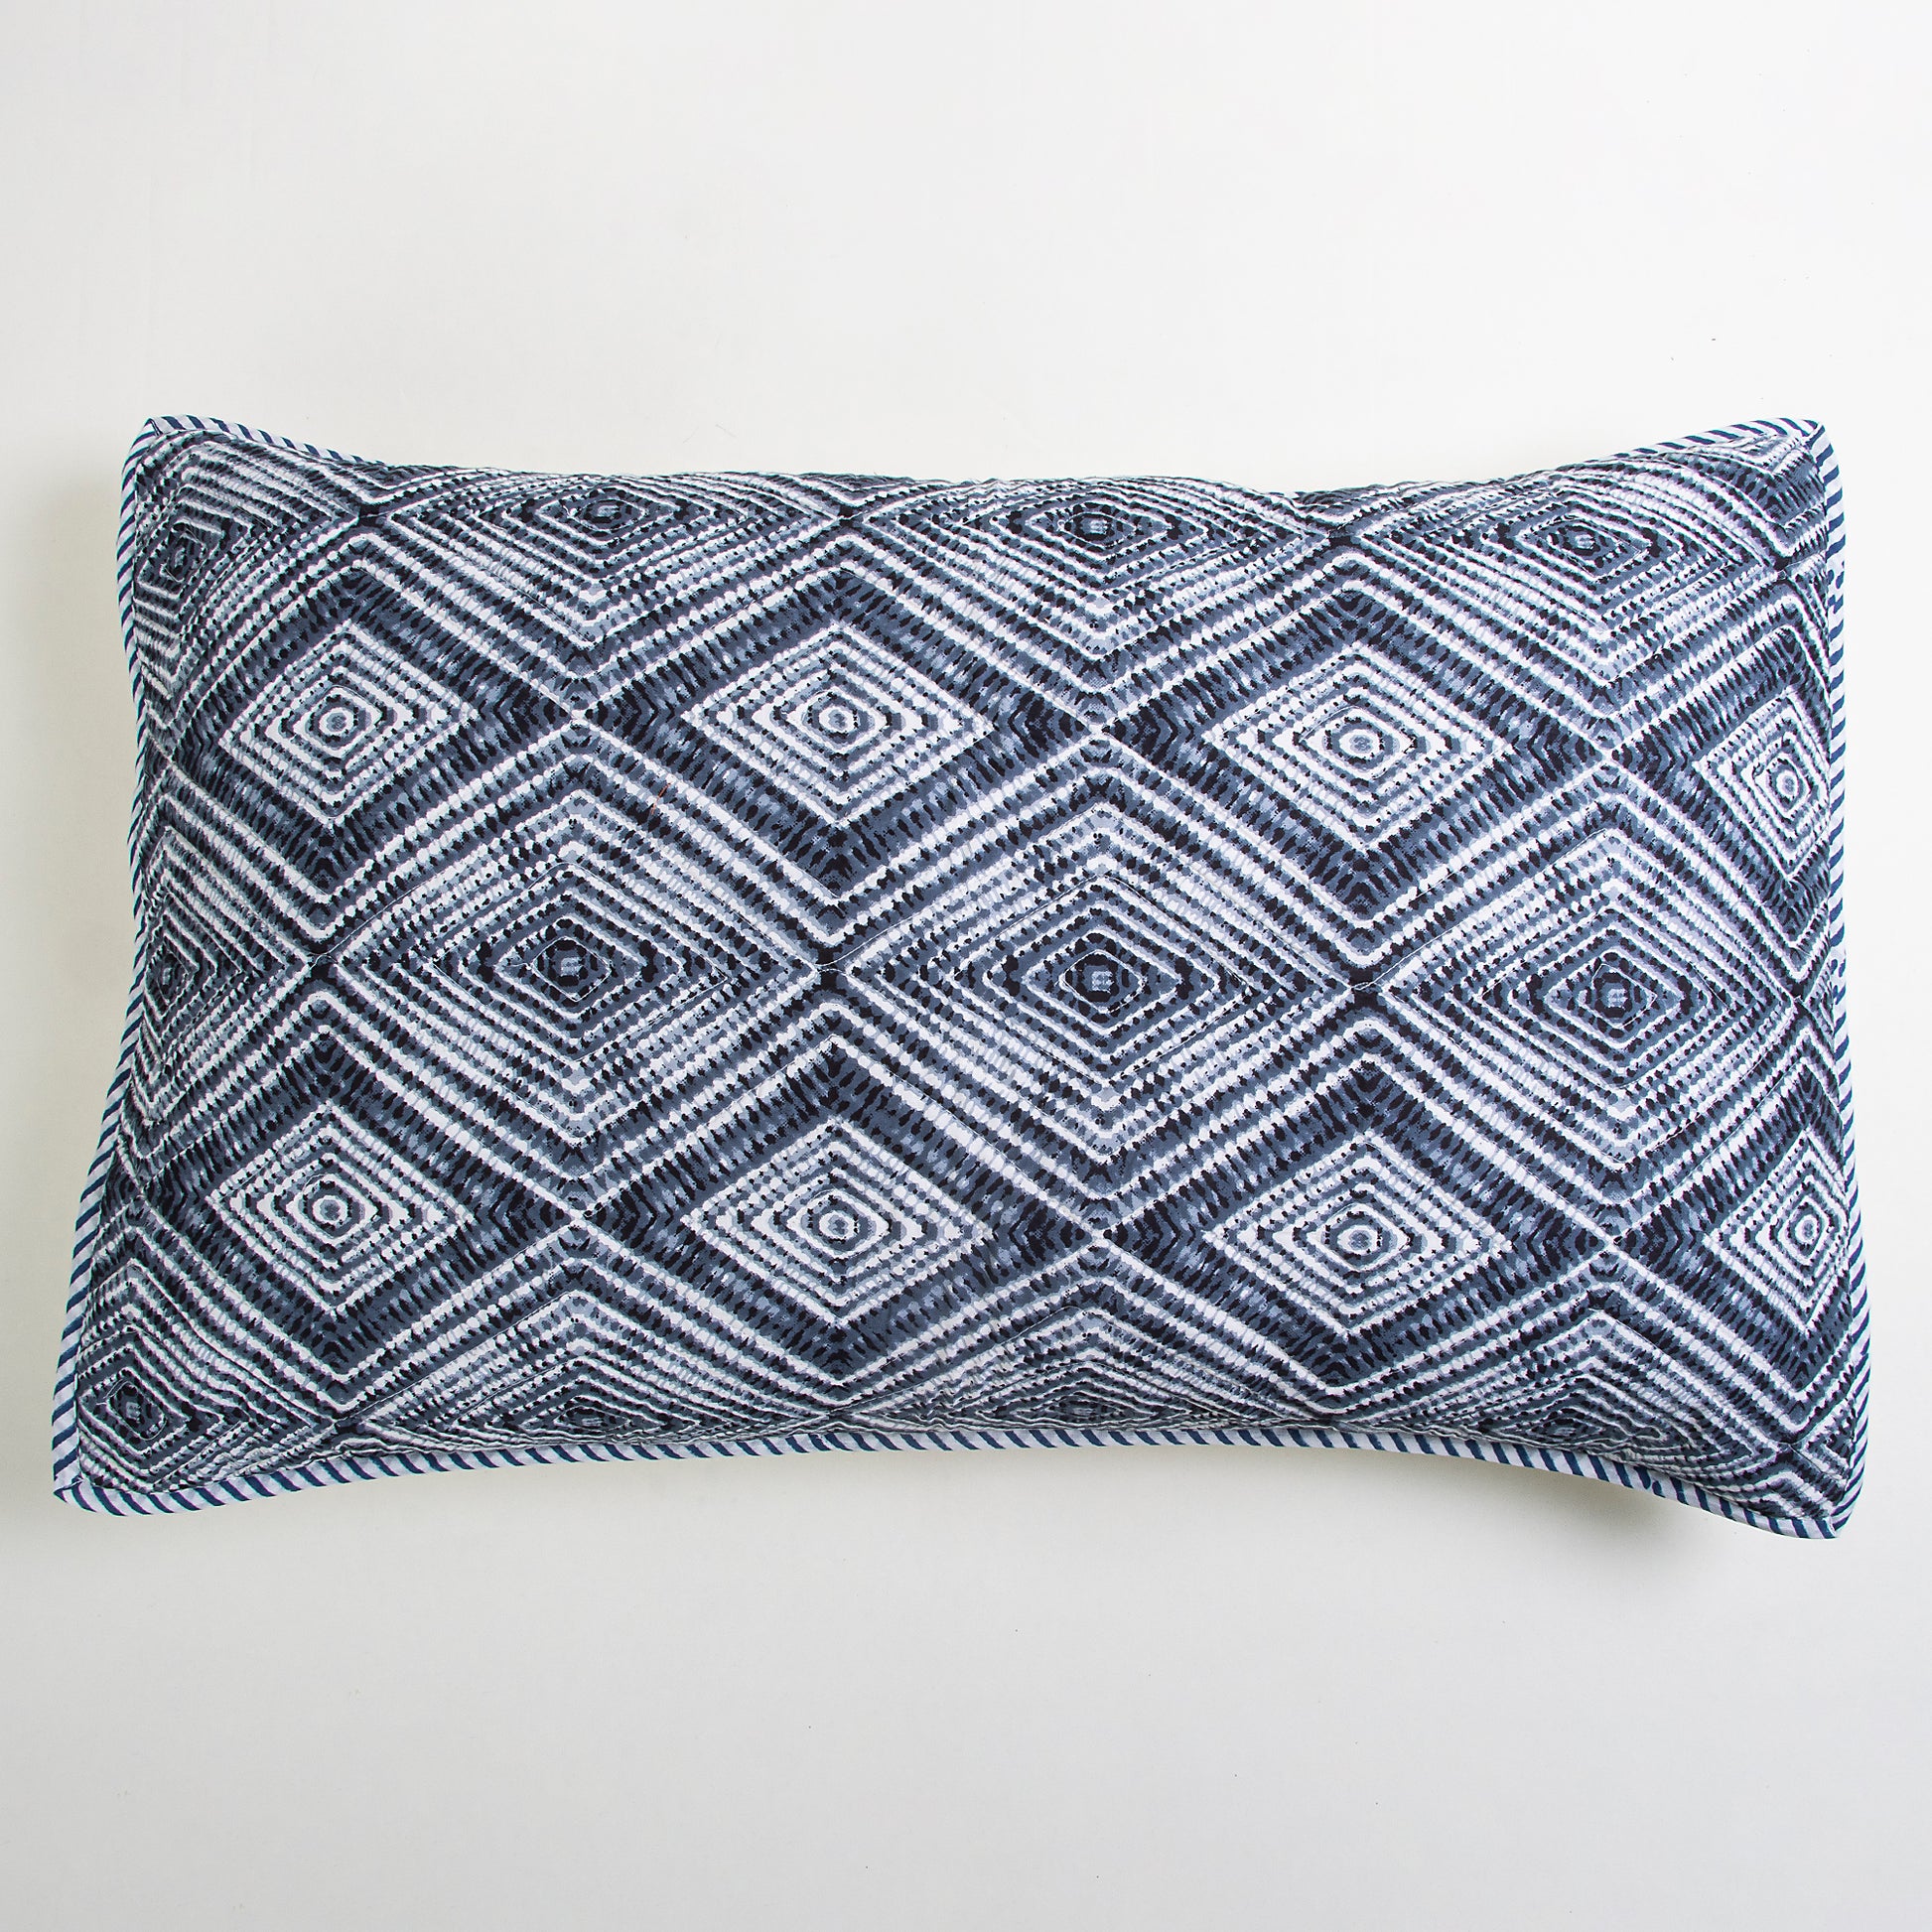 Handmade Cotton Quilted Christmas Pillow Covers Ikat Print